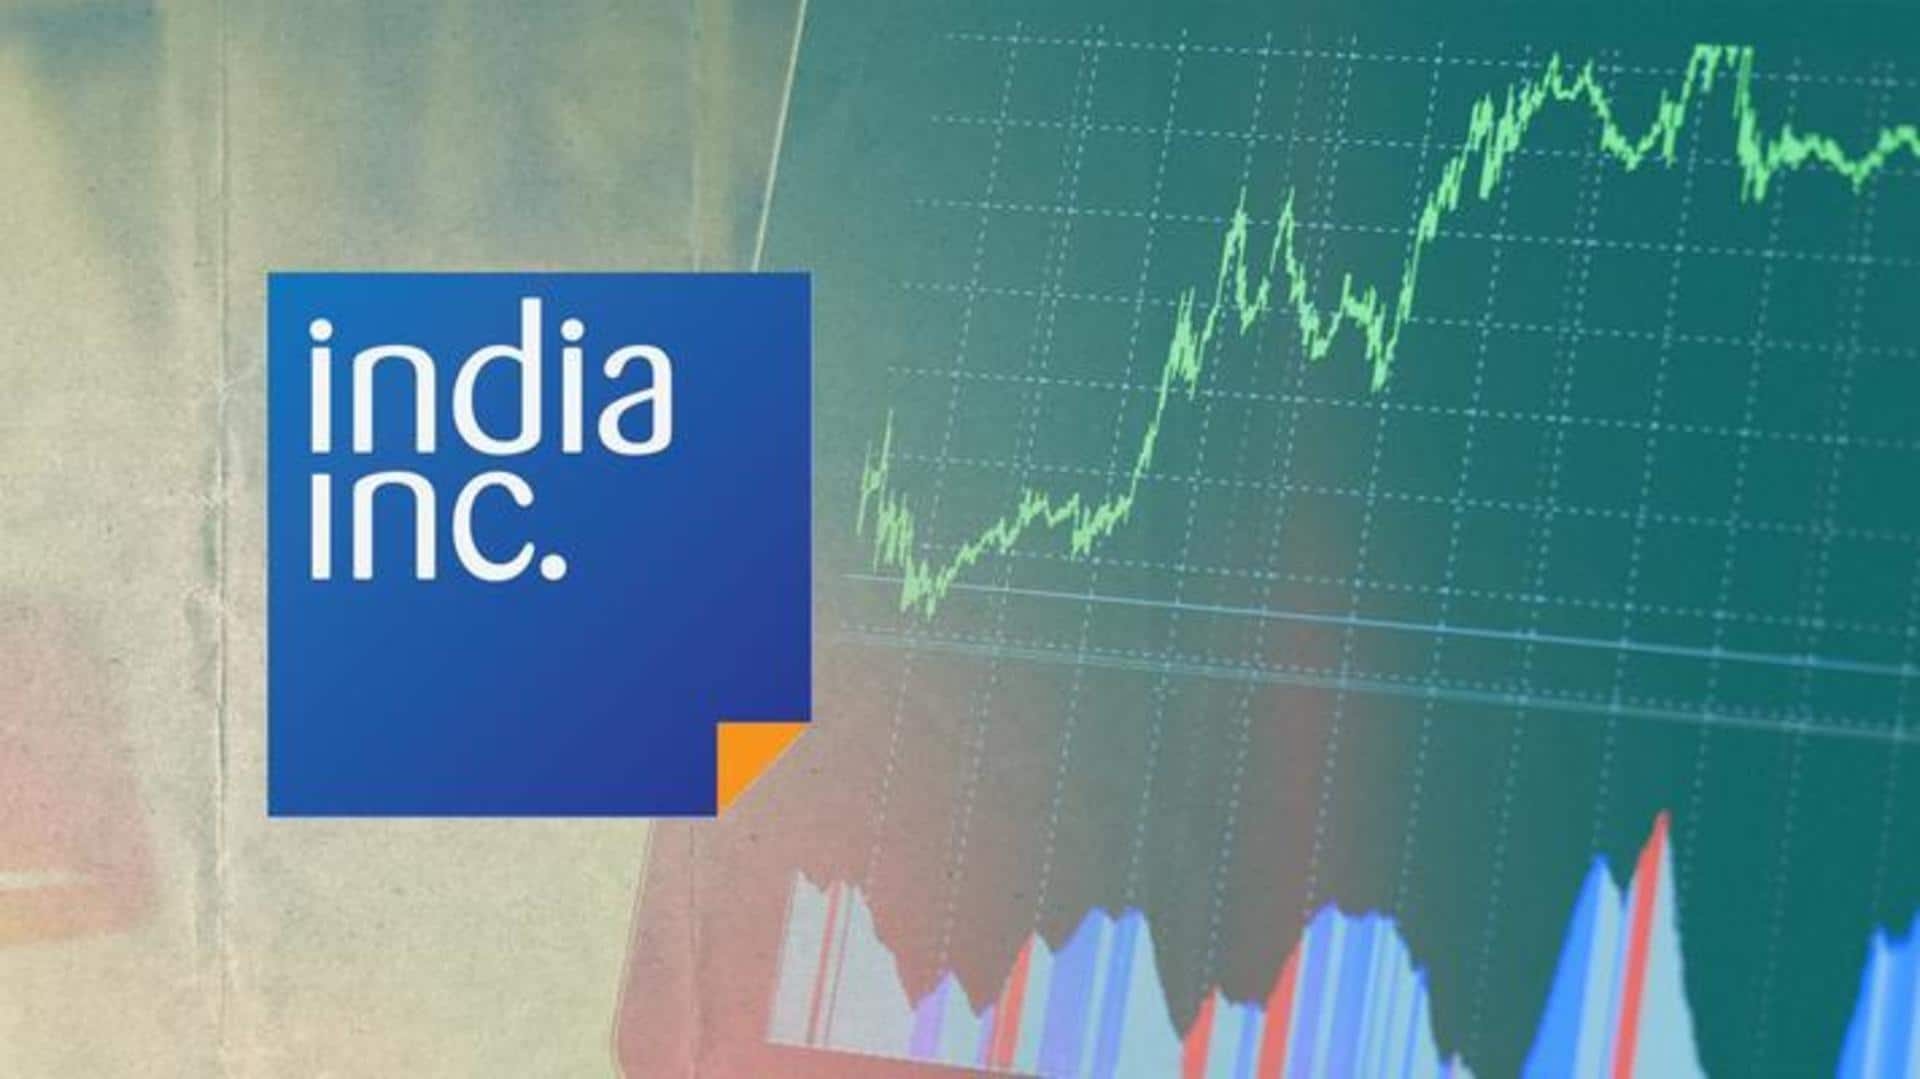 India Inc. brand value is now worth over $100 billion